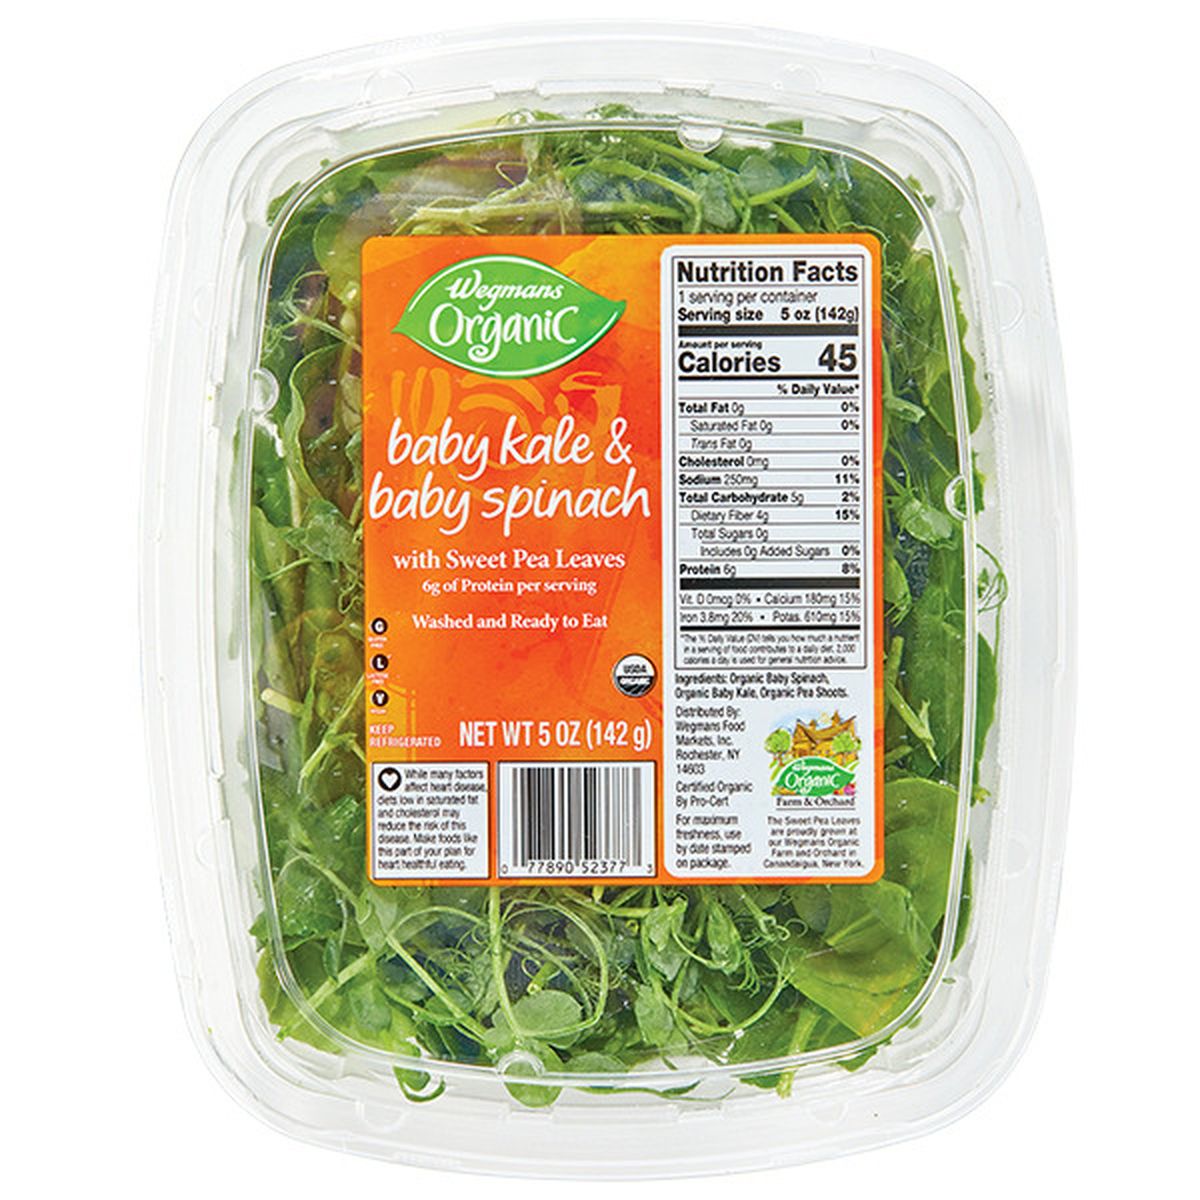 Calories in Wegmans Organic Baby Kale & Baby Spinach with Sweet Pea Leaves